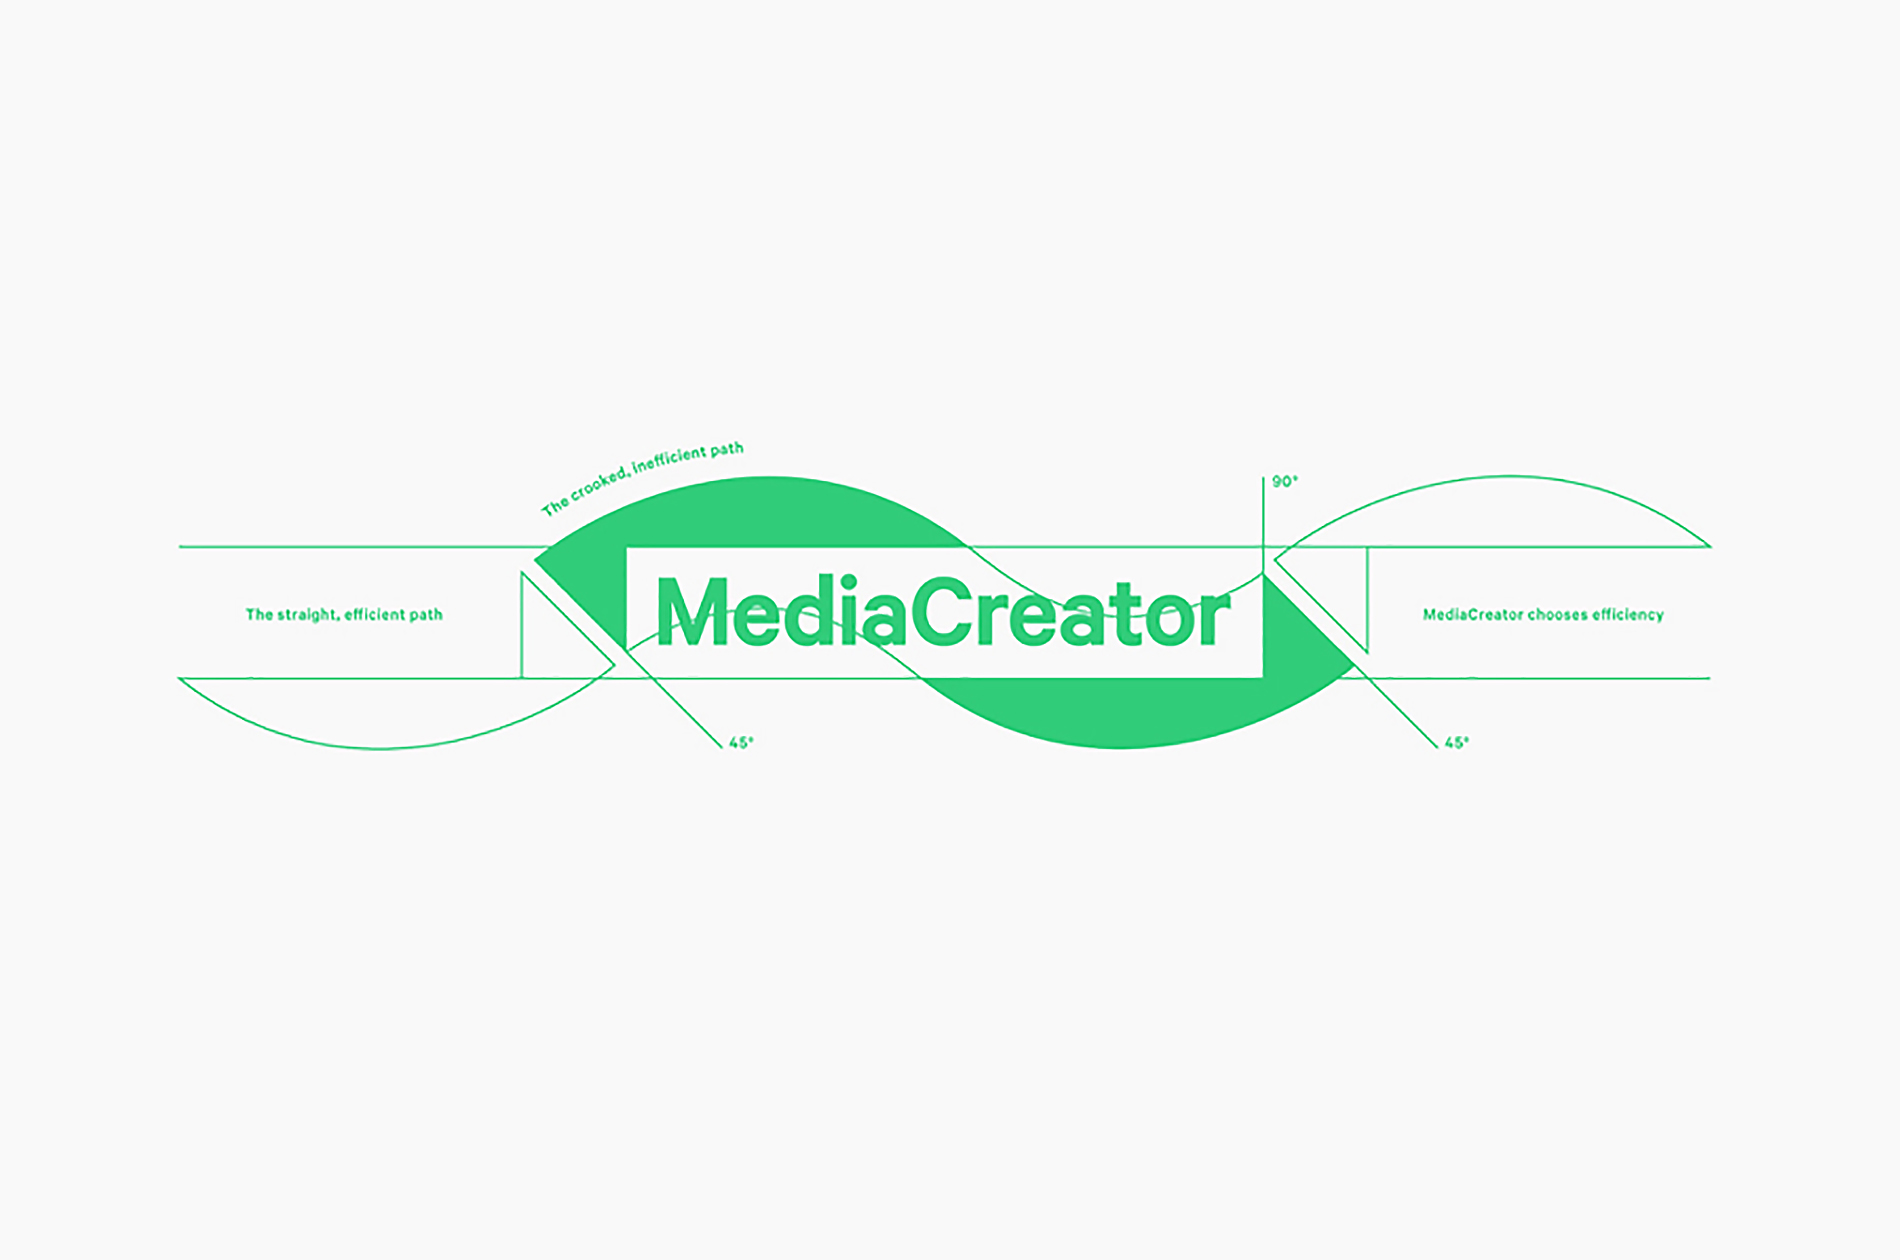 Logo designed by Lundgren+Lindqvist for Swedish print production and project management company MediaCreator